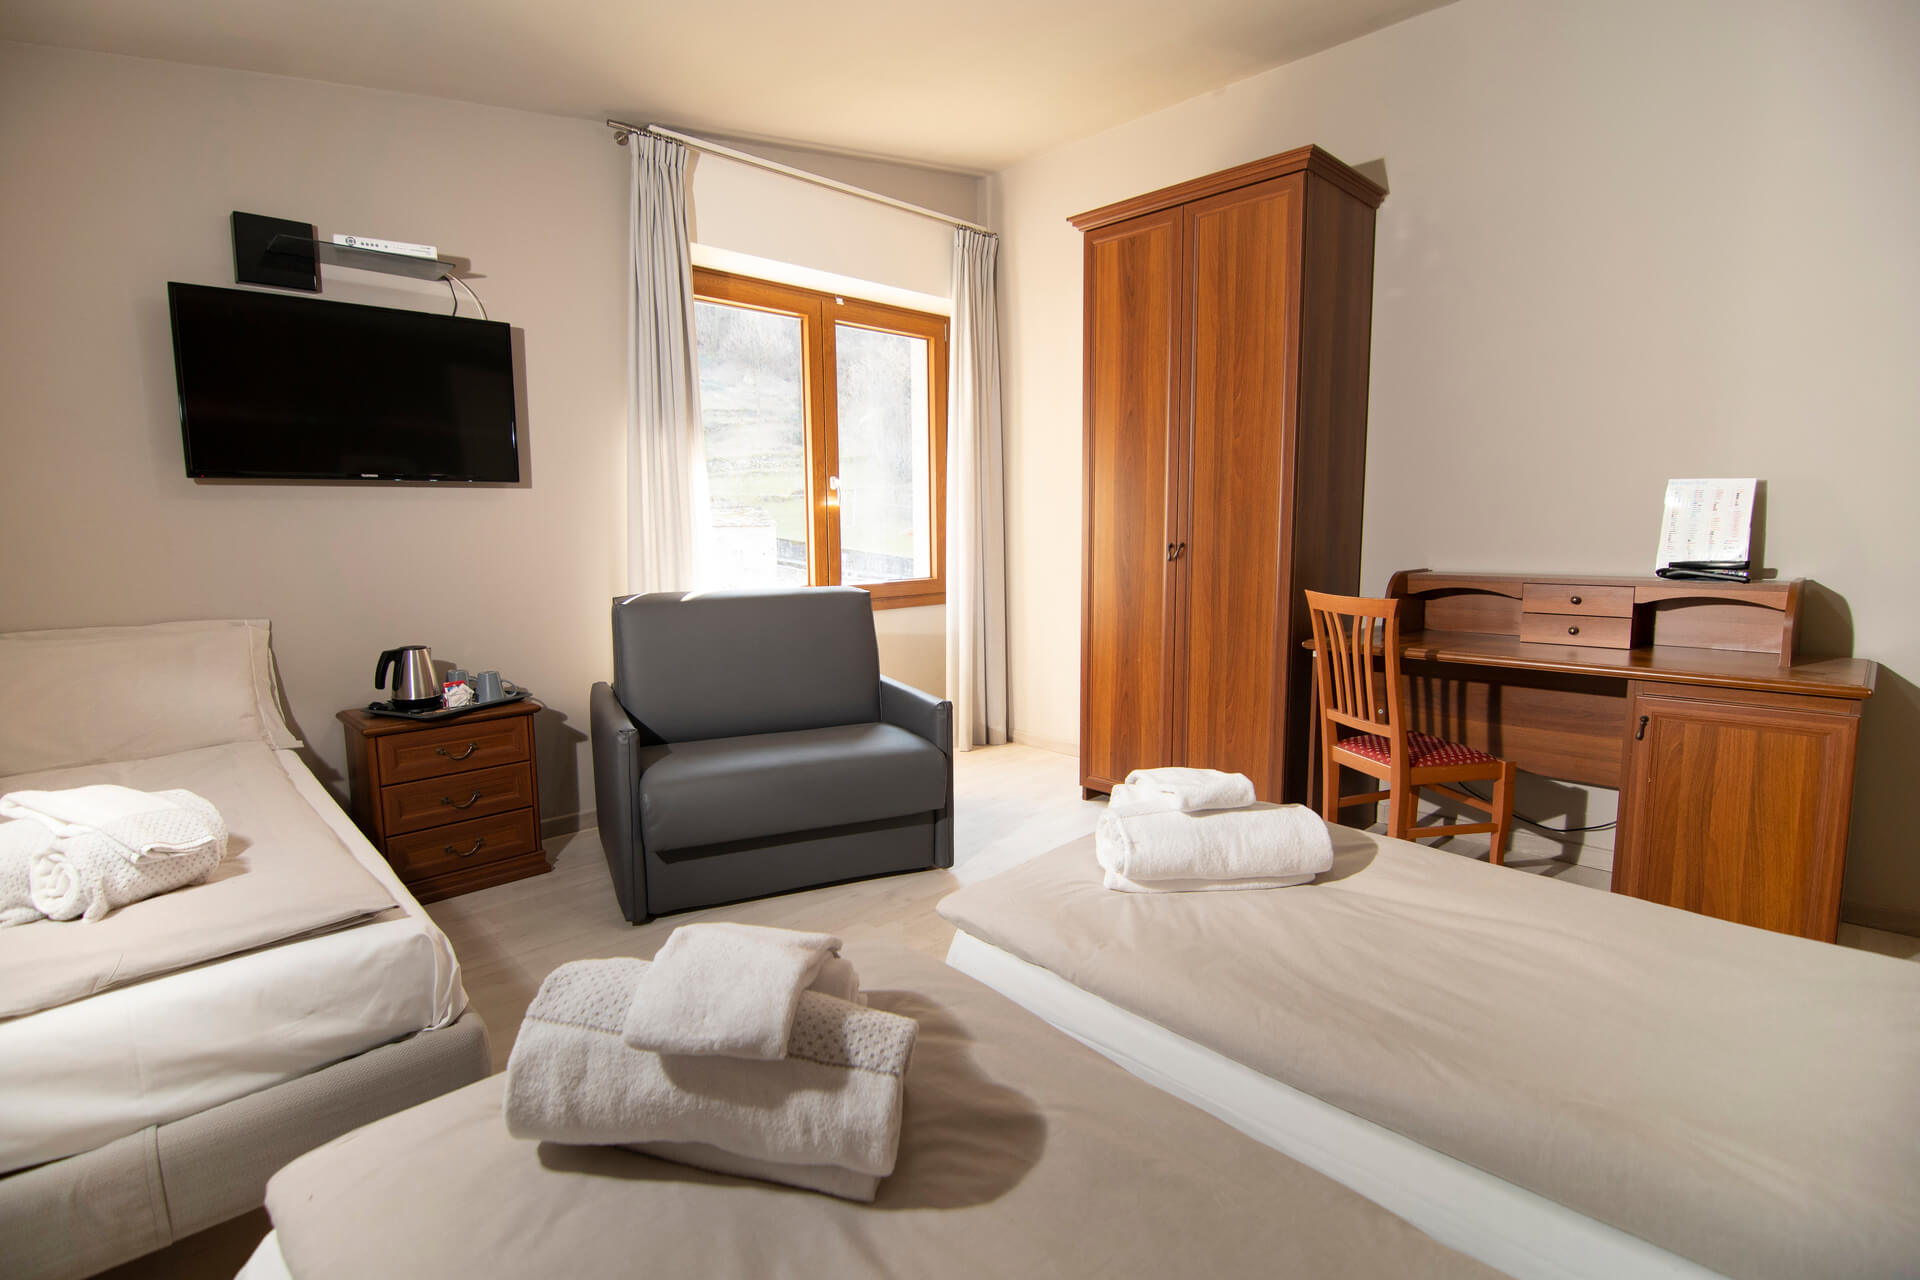 Overview of Comfort room for 4 people: Galleria della Mina at Hotel Saligari